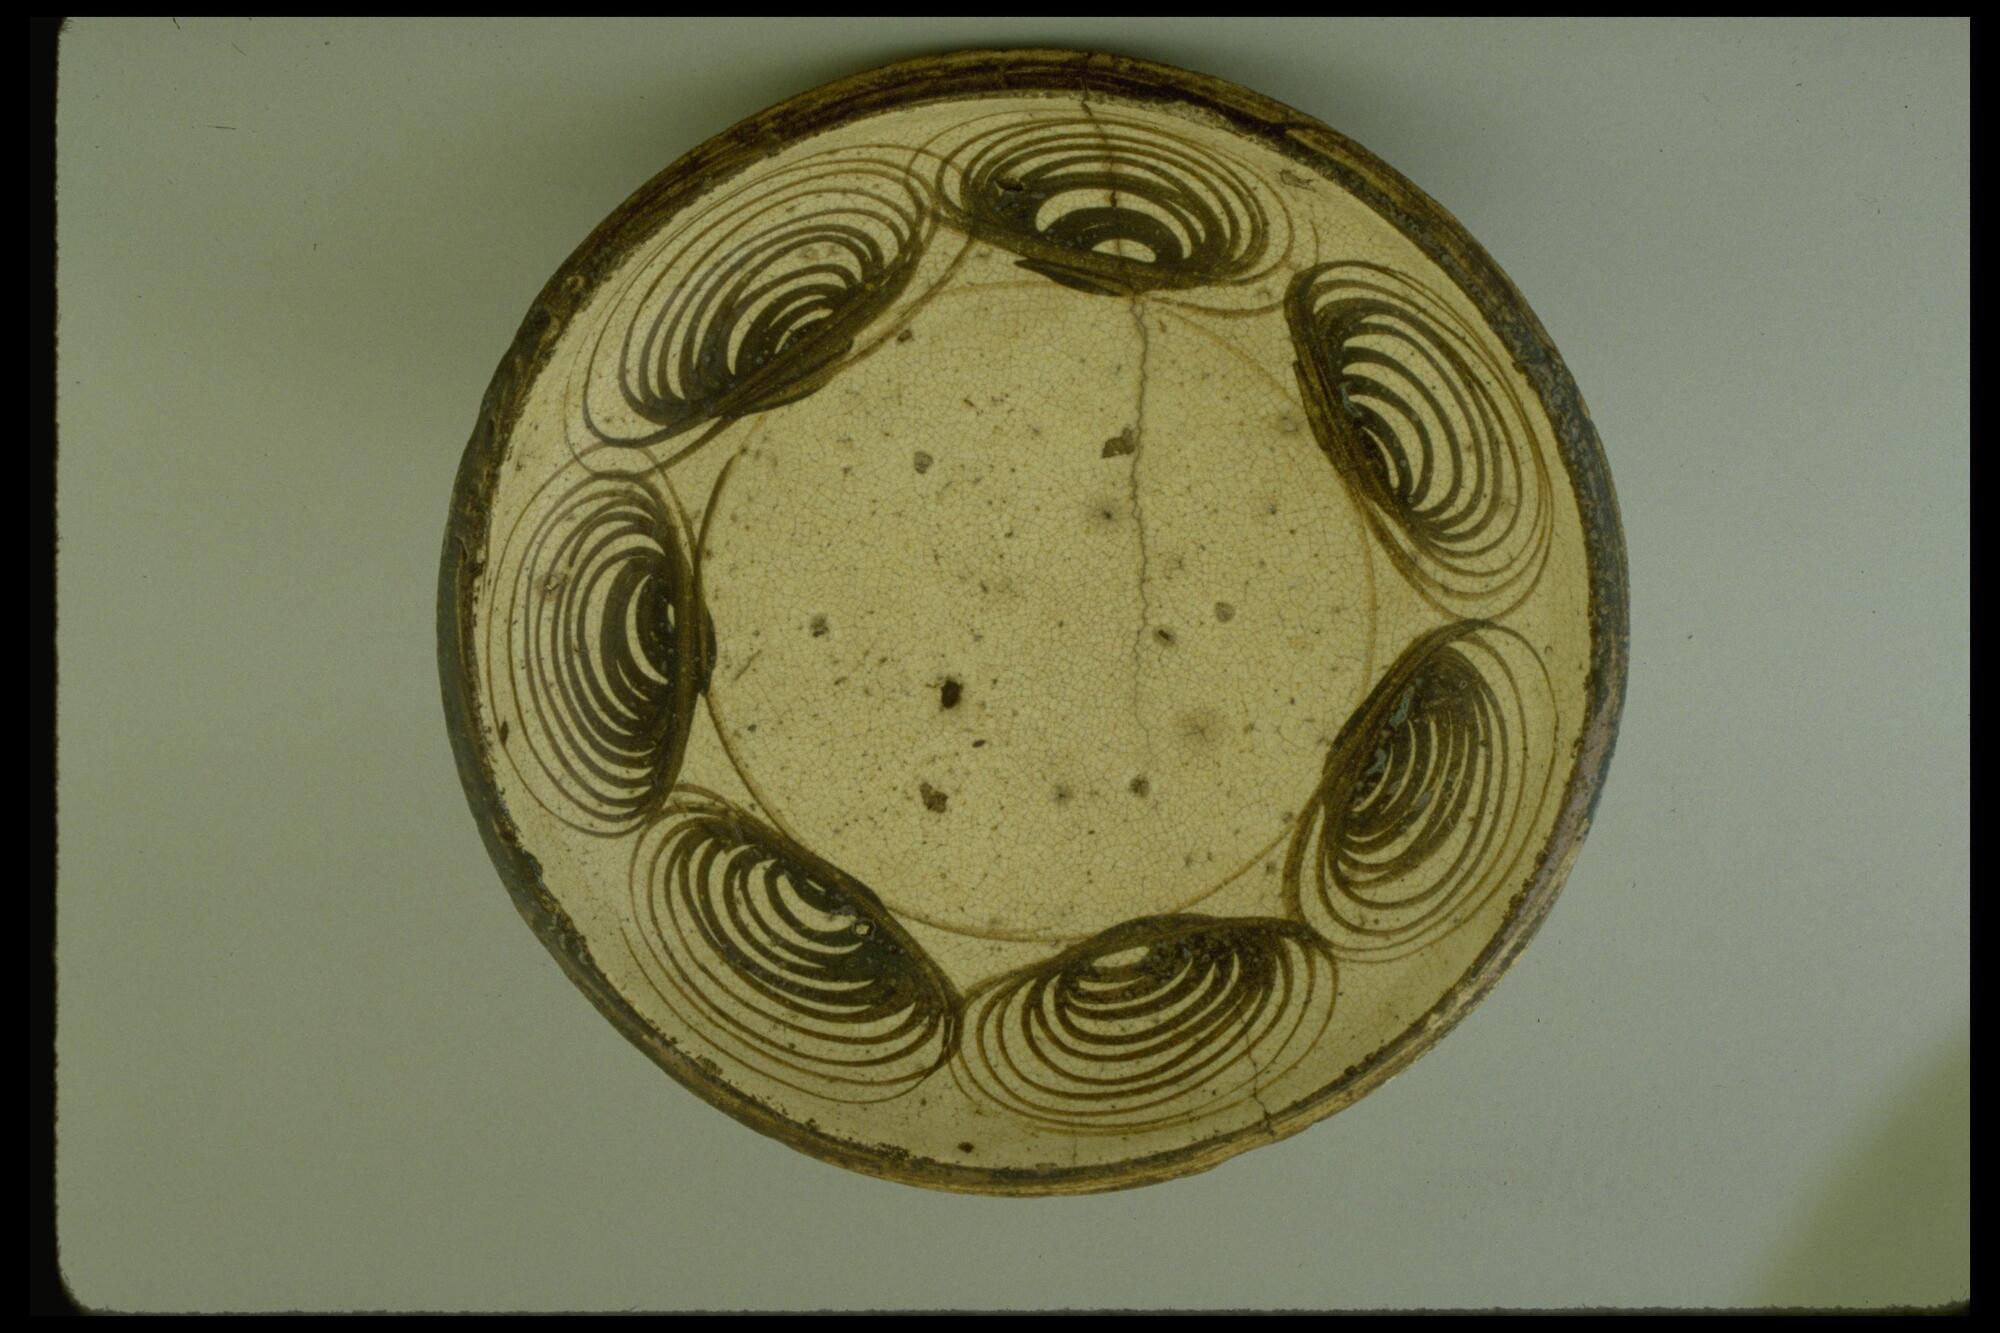 This plate has durable body and protective glazed surface. Seven brown ring-like patterns (said to be modeled after horse eyes) decorate the inner rim of the large plate. The outermost edge is ringed in brown.